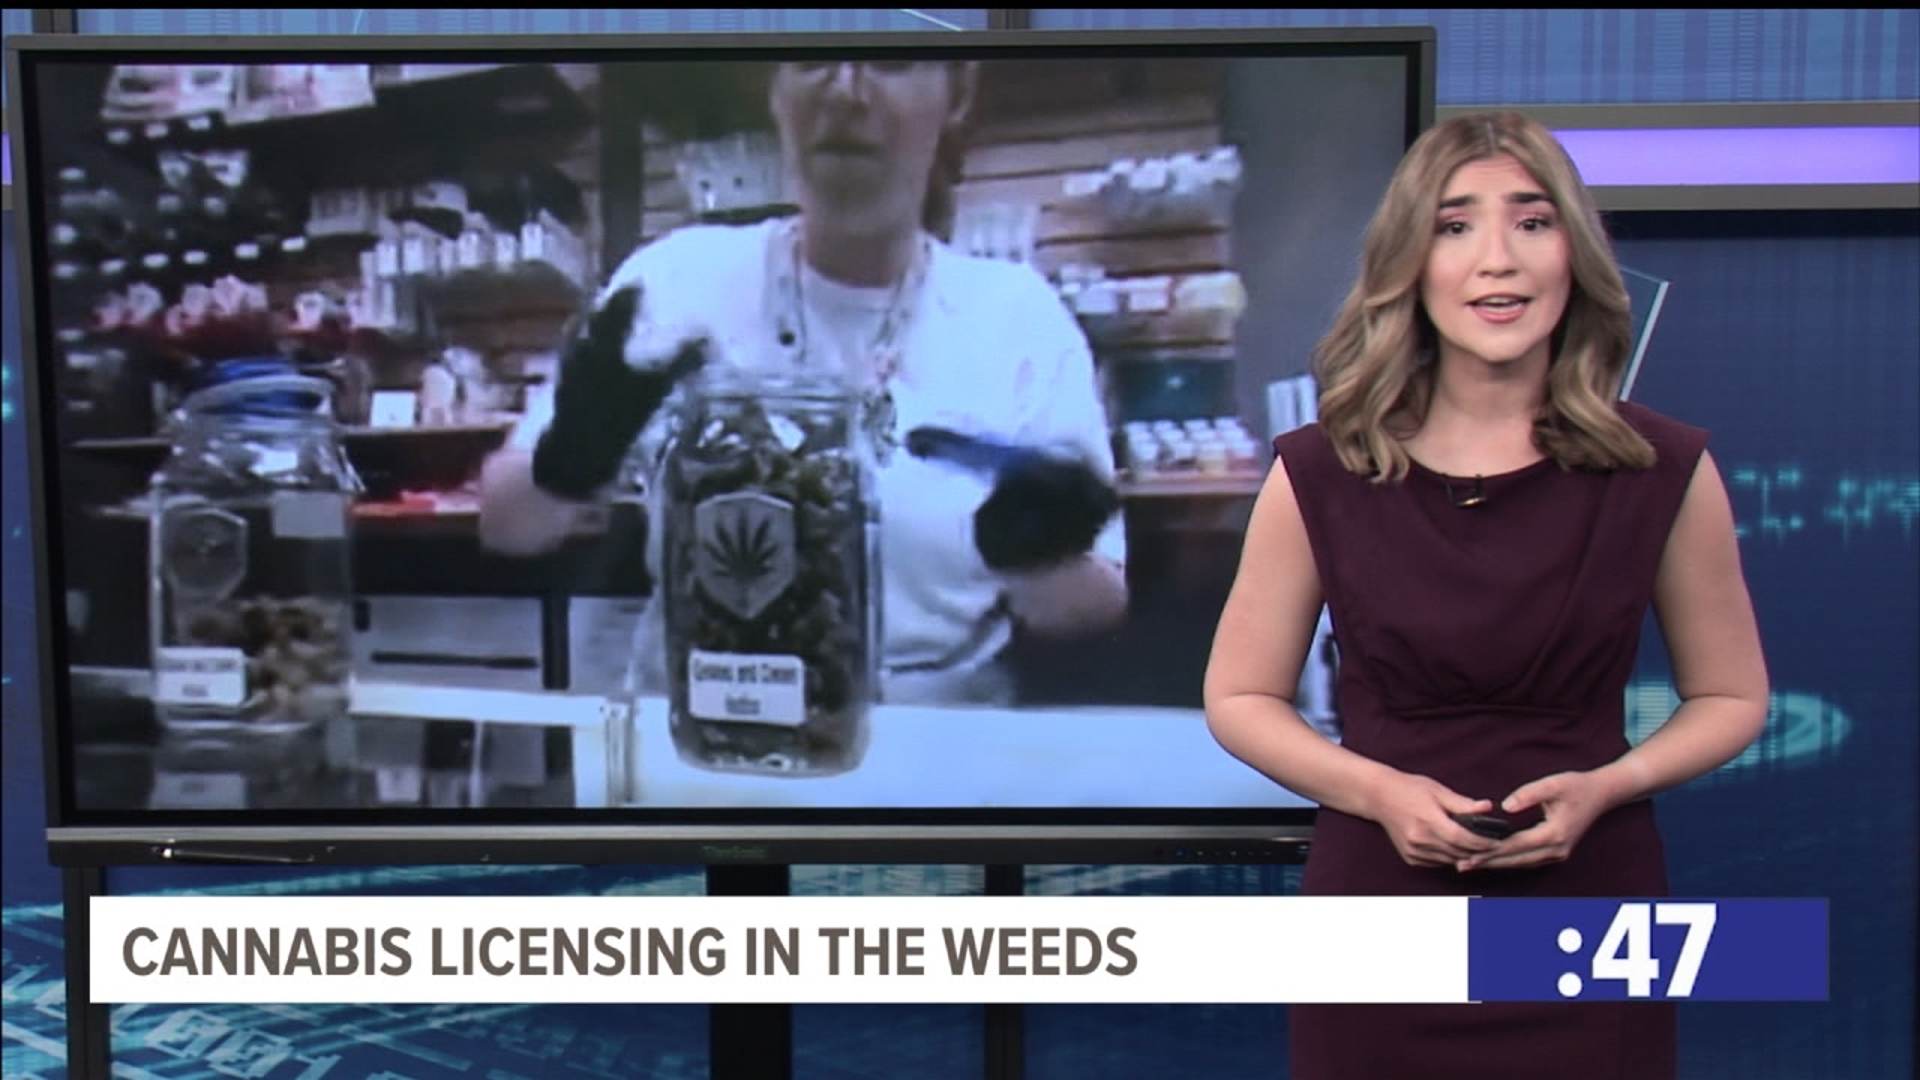 #Cannabis licensing in the weeds and more you'll see Sunday - in #54Seconds or less.